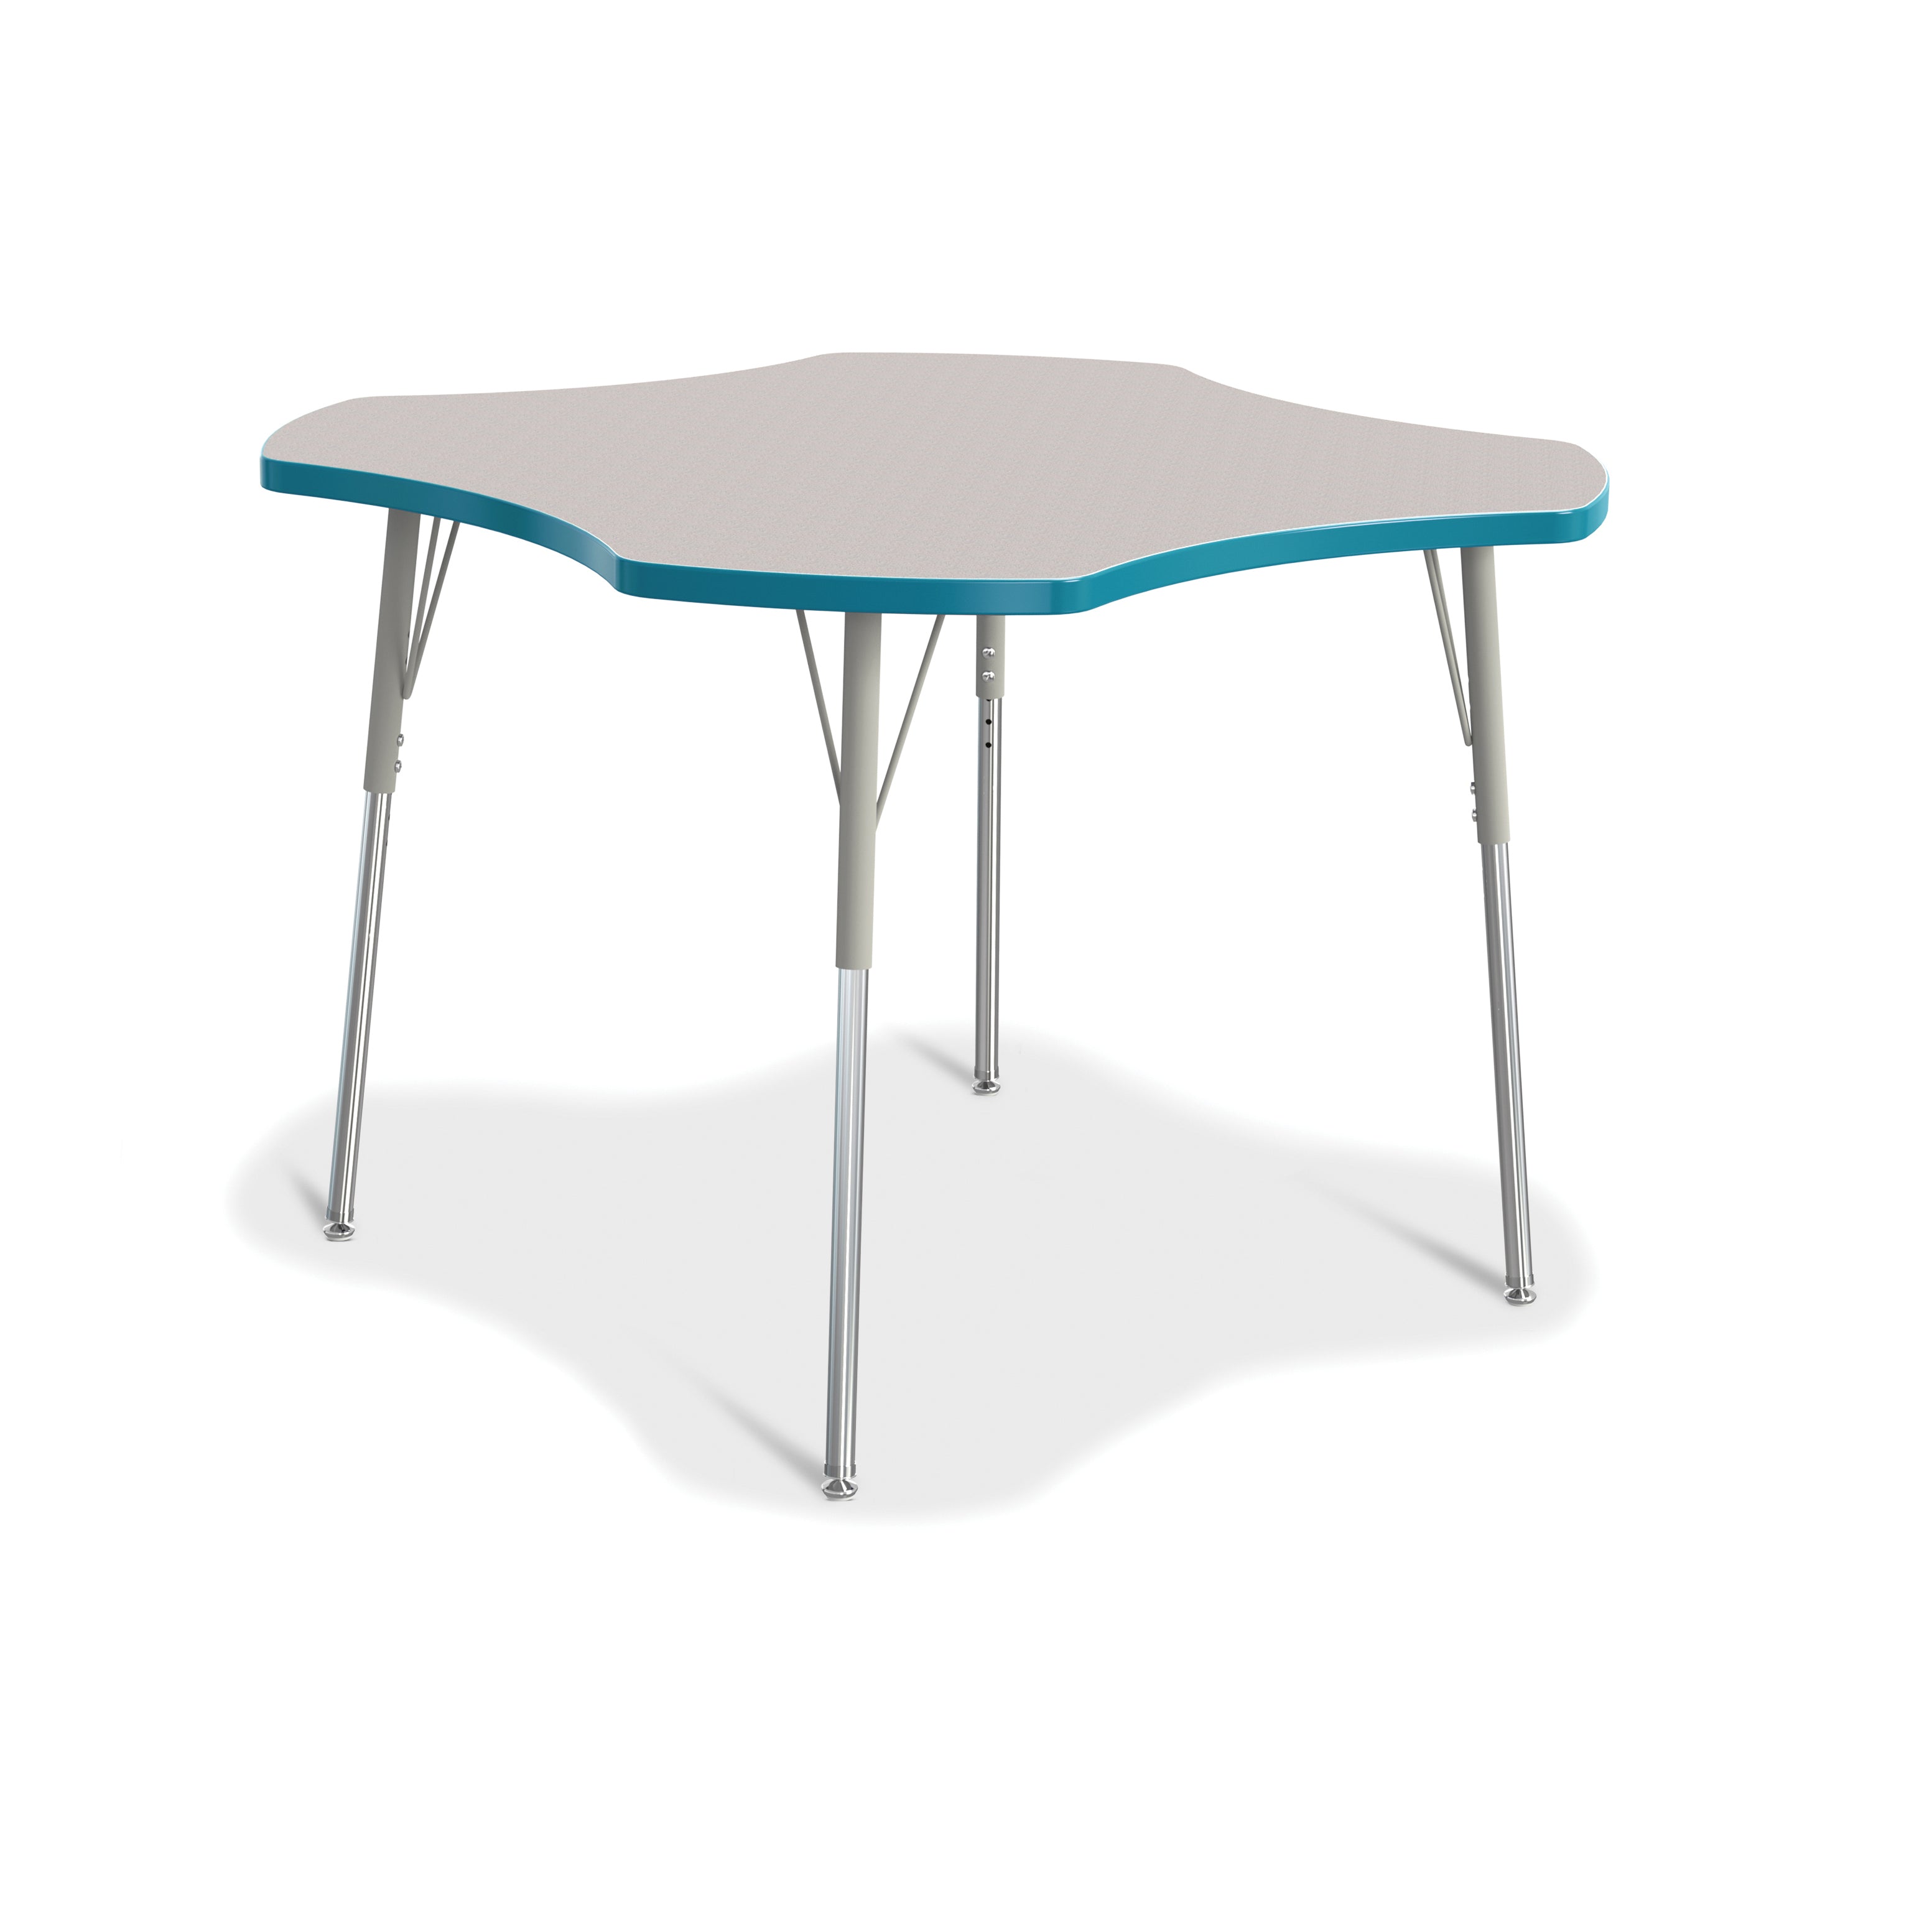 6453JCA005, Berries Four Leaf Activity Table, A-height - Freckled Gray/Teal/Gray